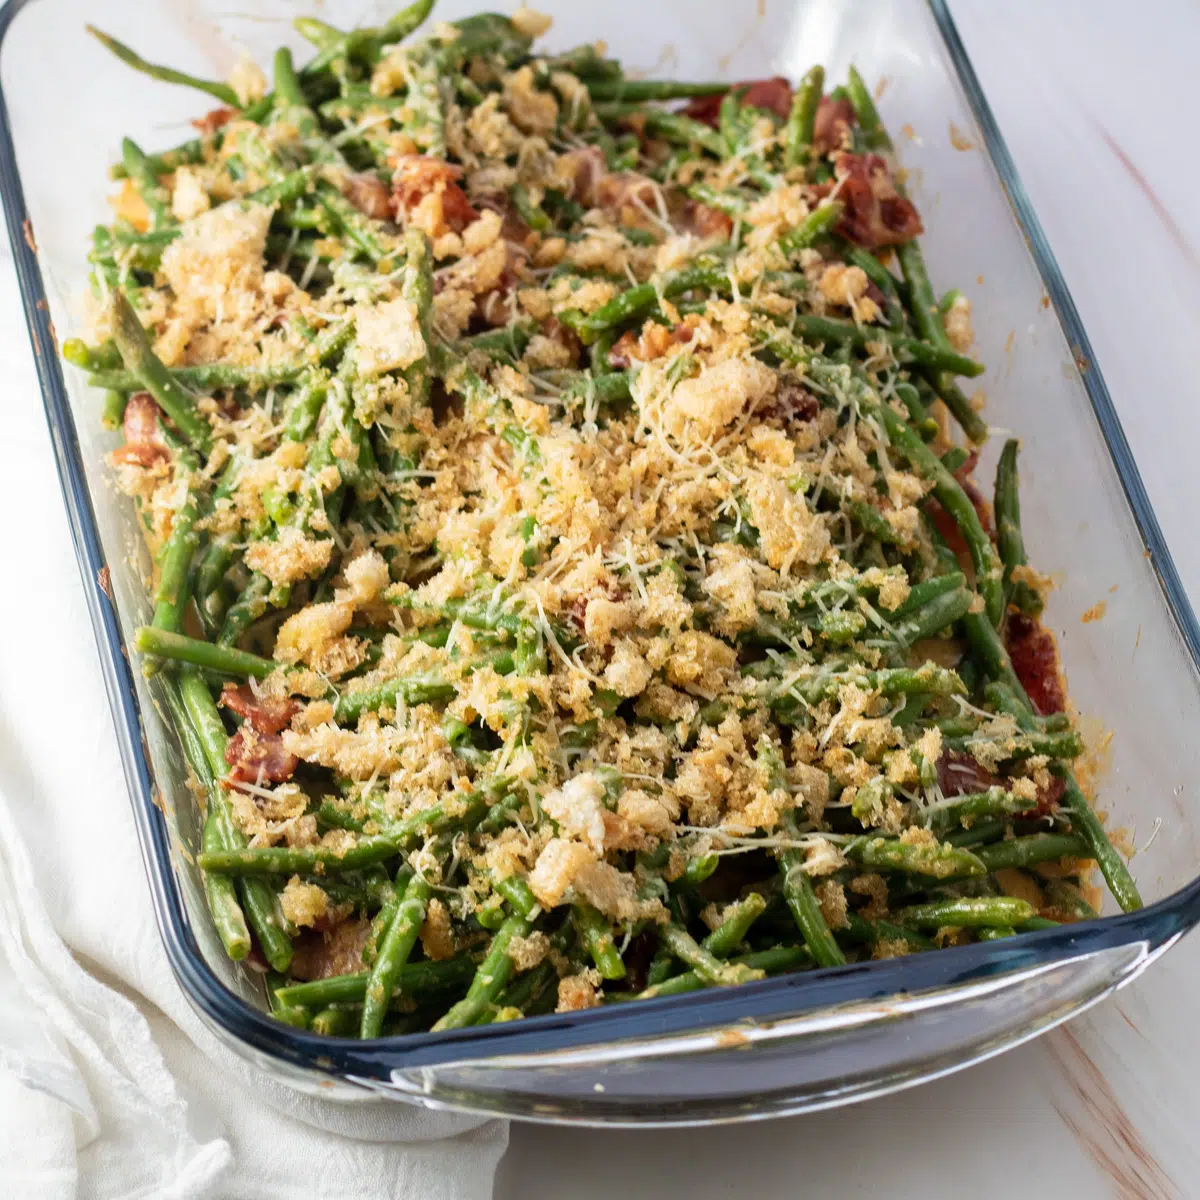 Green bean casserole with bacon in glass baking dish on light background.